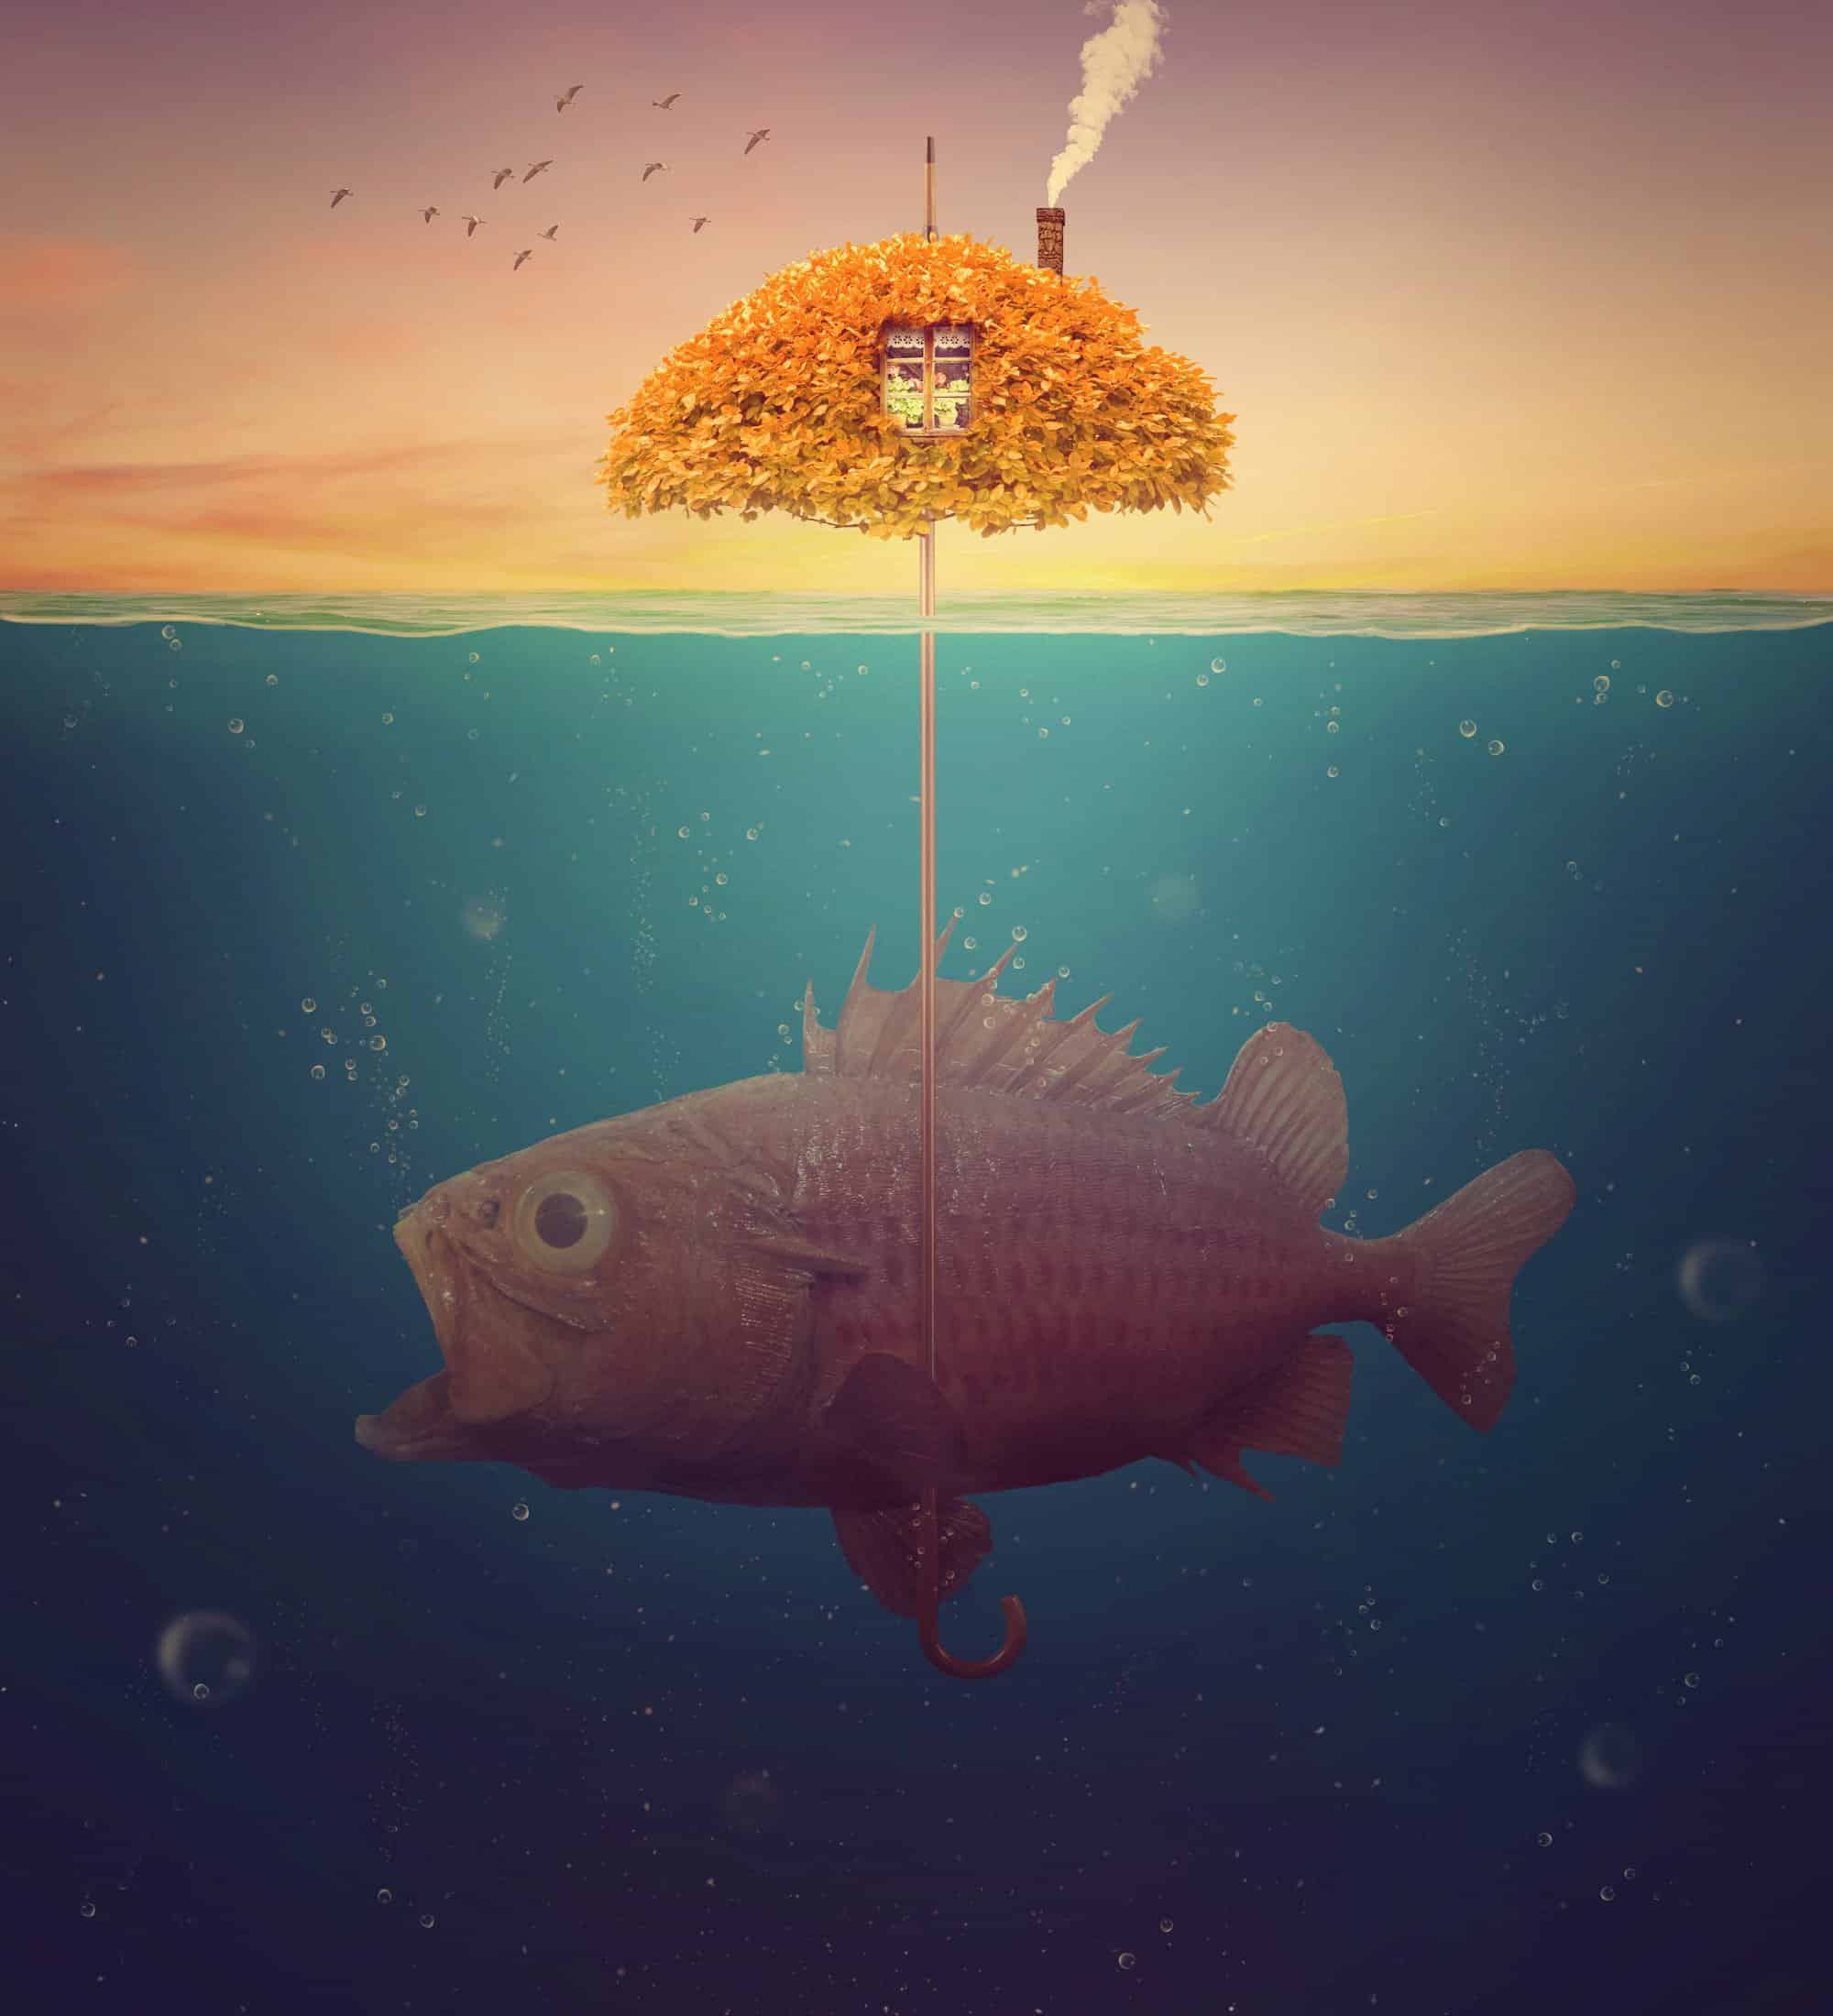 How to Create a Surreal Underwater Scene with Adobe Photoshop